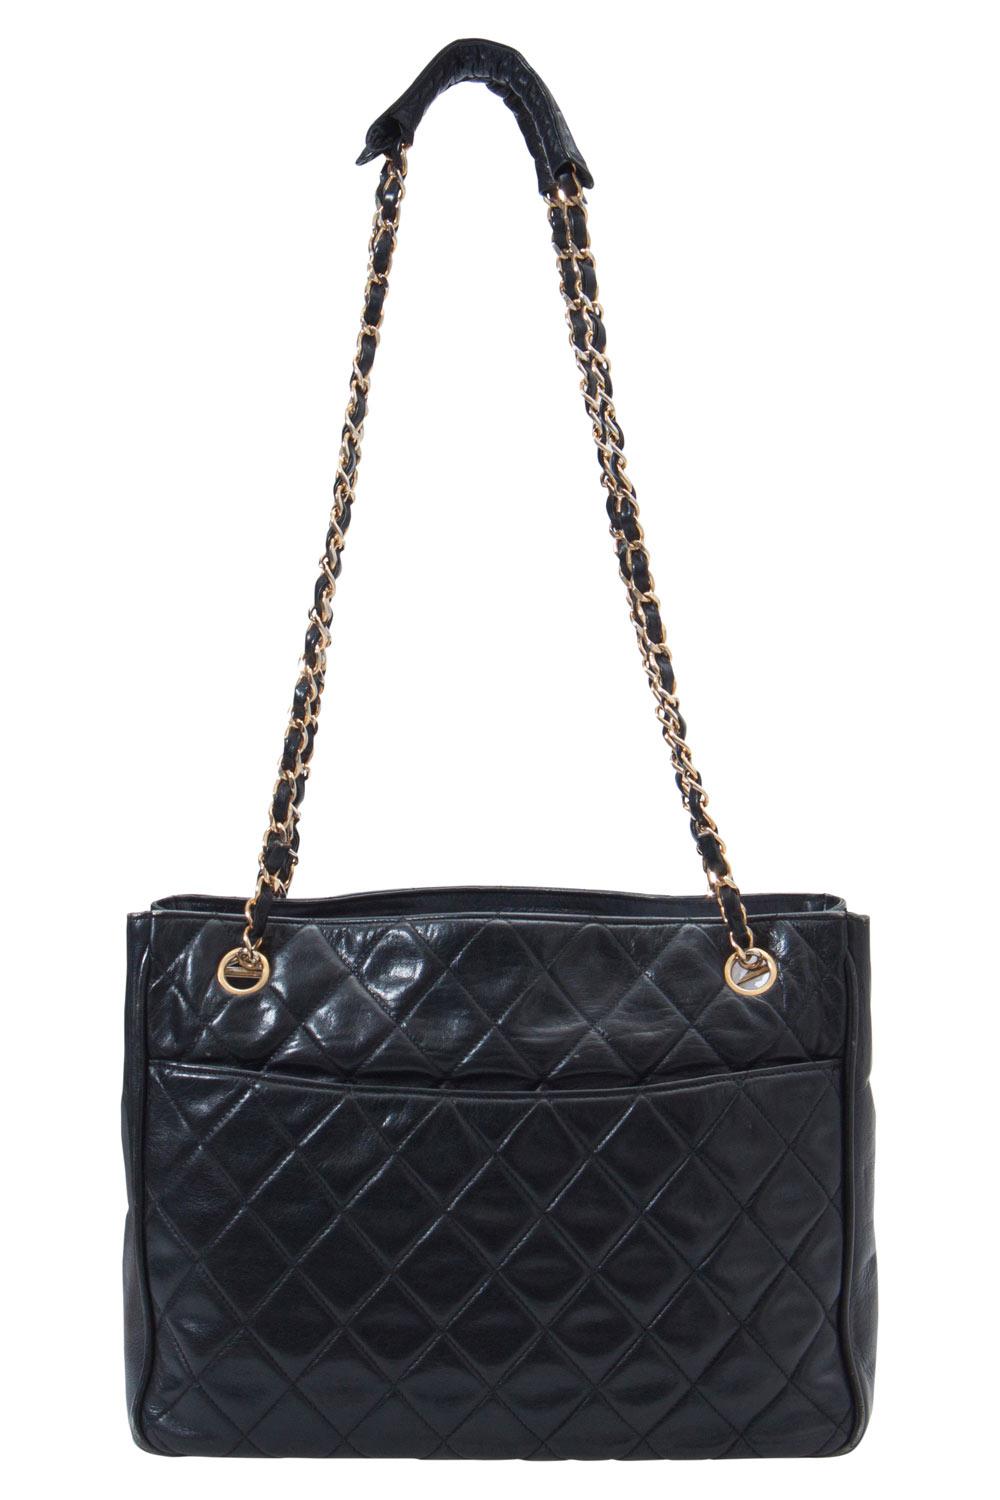 Give yourself a luxurious look with this black quilted leather bag that is stylish and functional. This beauty comes with a well-sized interior that features a small zip pocket and adequate space to house your essentials comfortably. With an